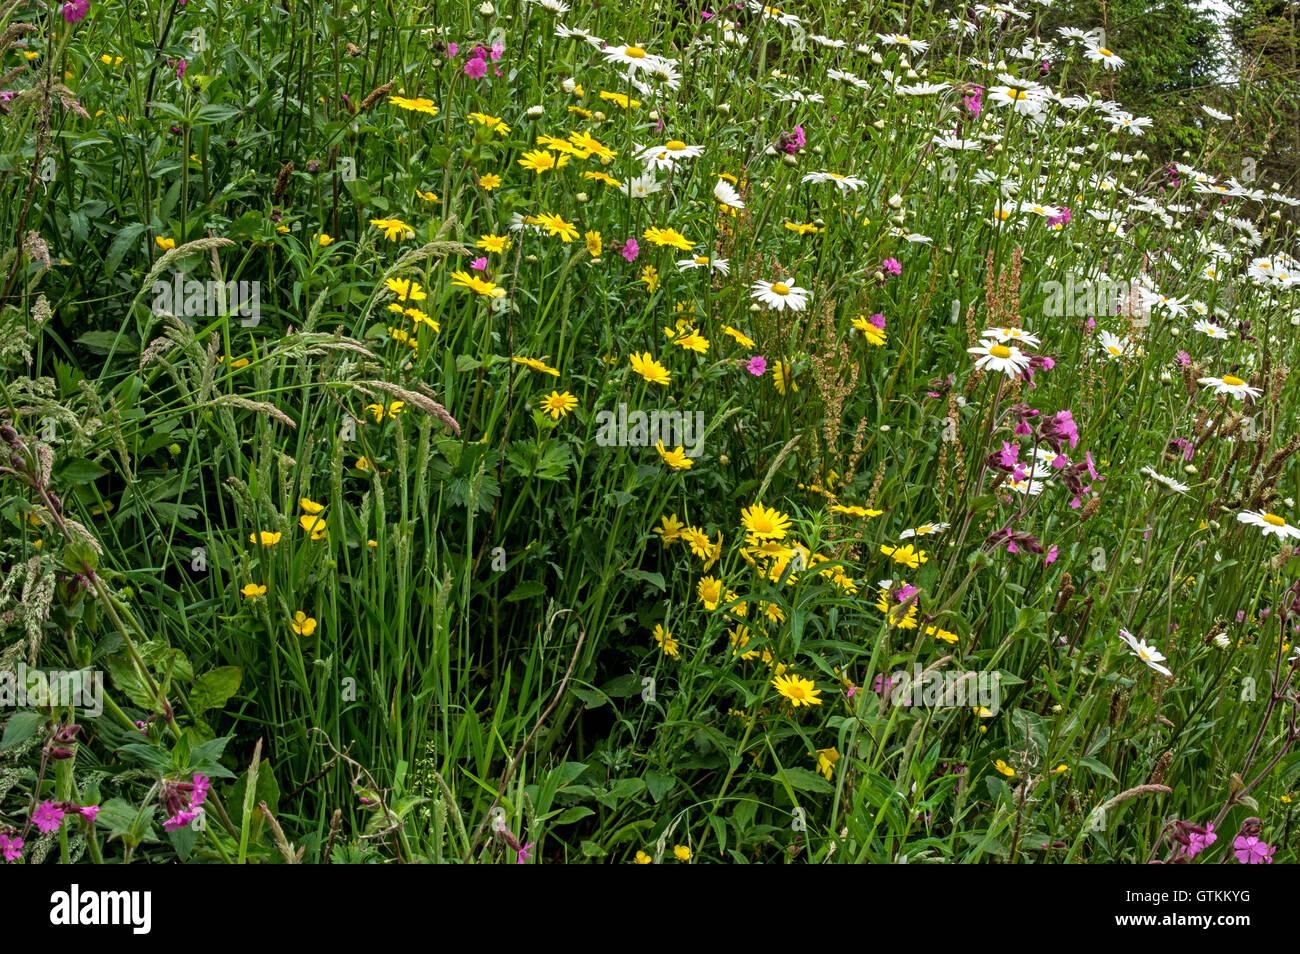 Arable weeds. Typical plants include Oxe-eye Daisies and Corn Marigold Stock Photo